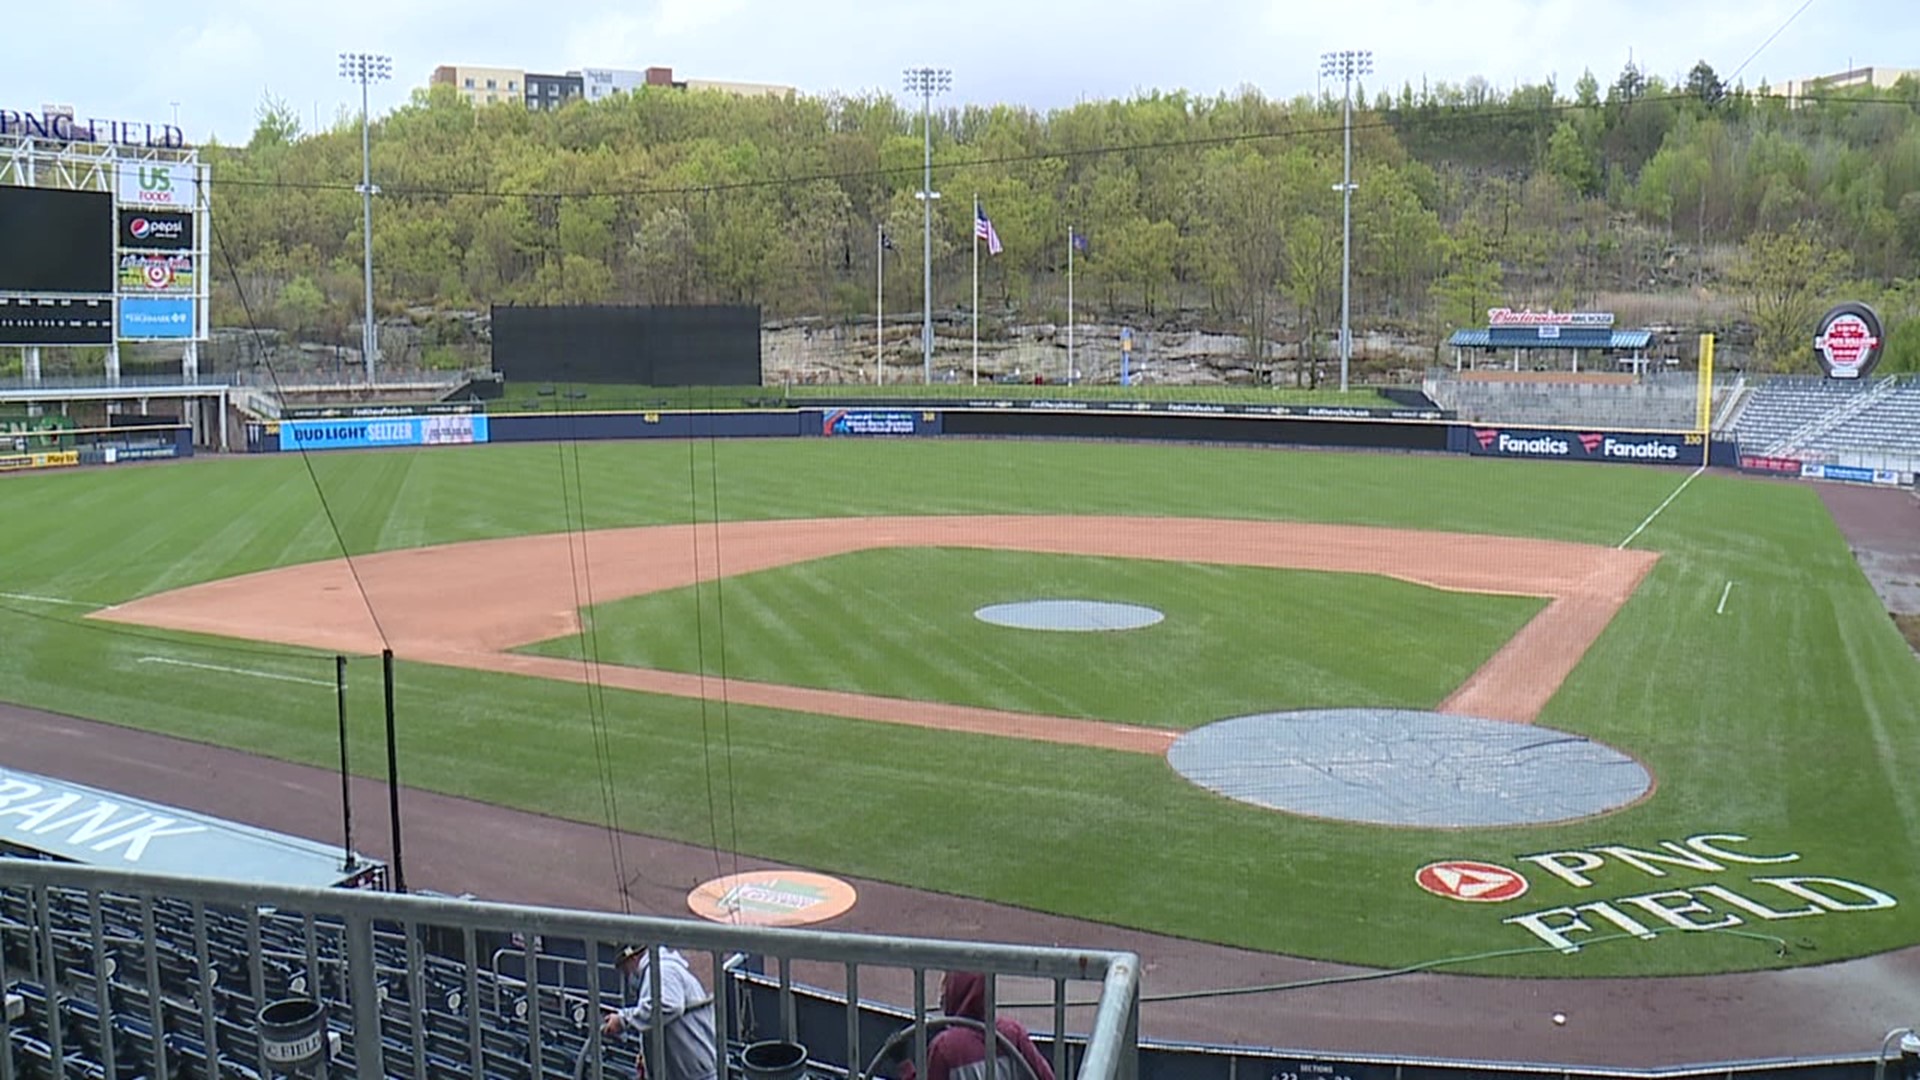 Fans will notice some changes at PNC Field Tuesday night.